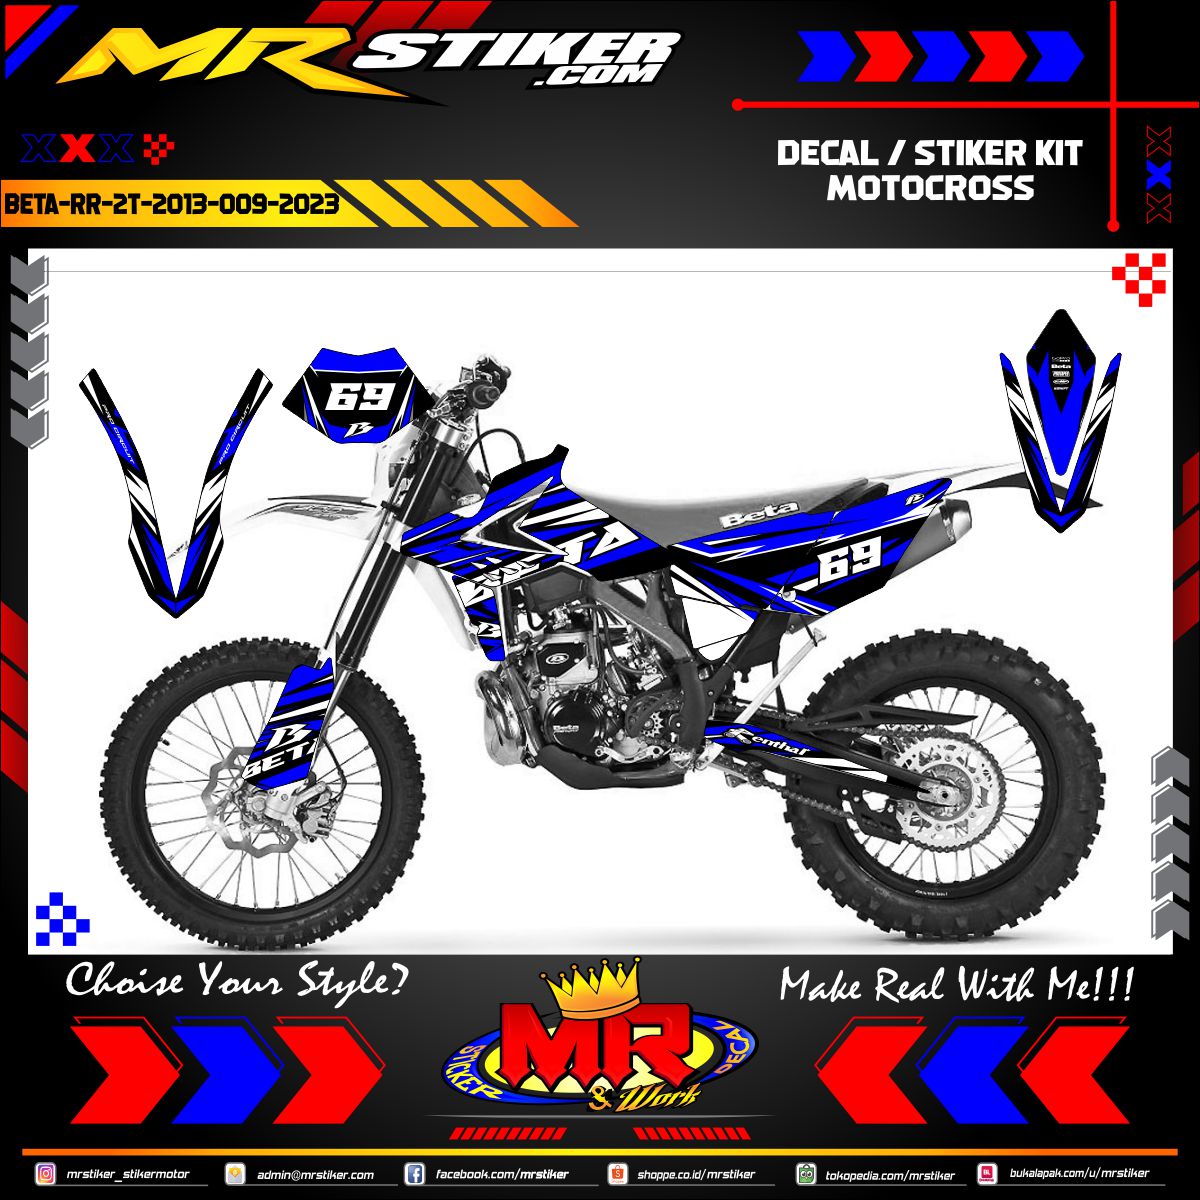 Stiker motor decal Motocross Beta RR 2T 2013 Blue Line Graphic Abstrack Trail Decal